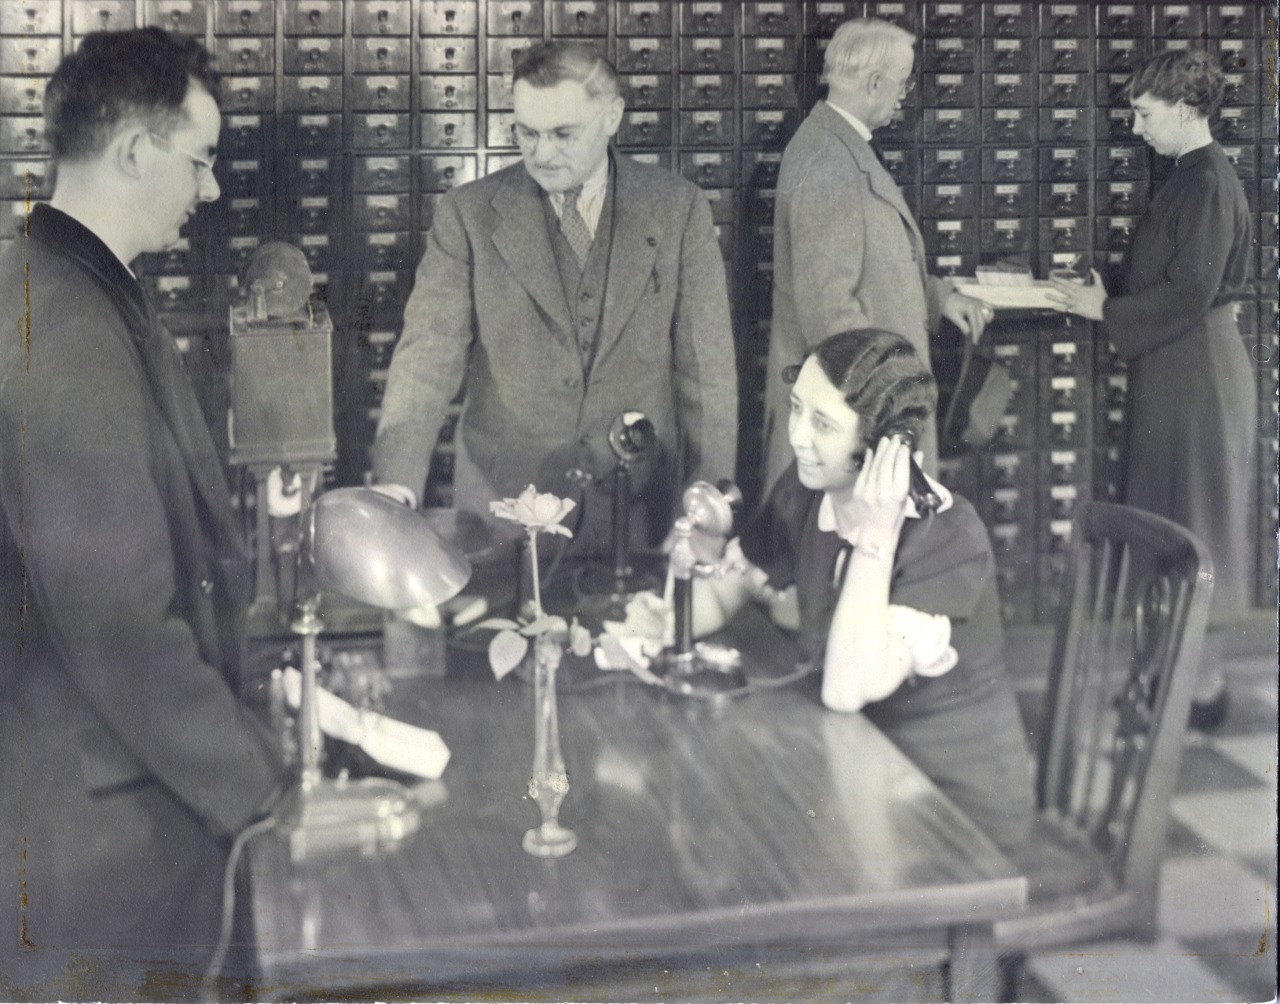 Black and white of female librarian on the phone at a table in front of 3 men and the wall-size card catalog.